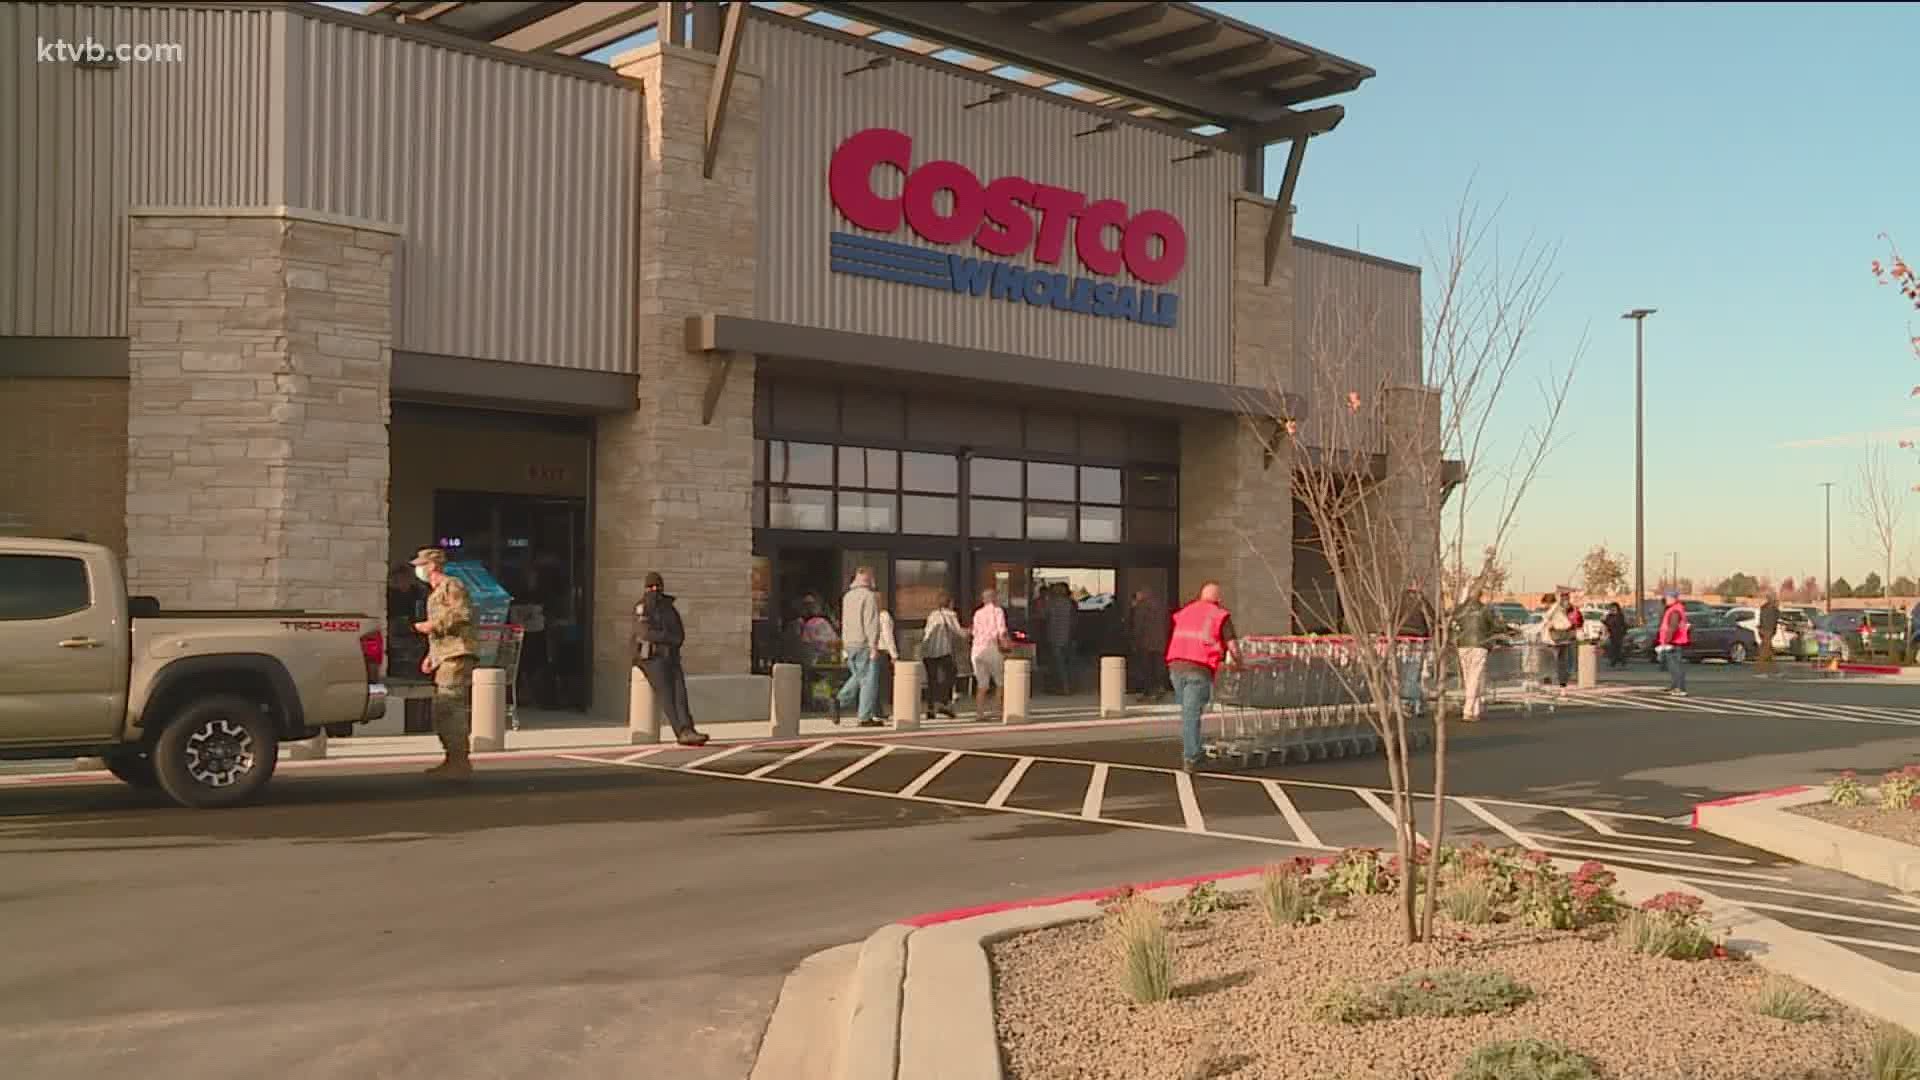 Meridian Costco opens after years in the making, bringing lots of new